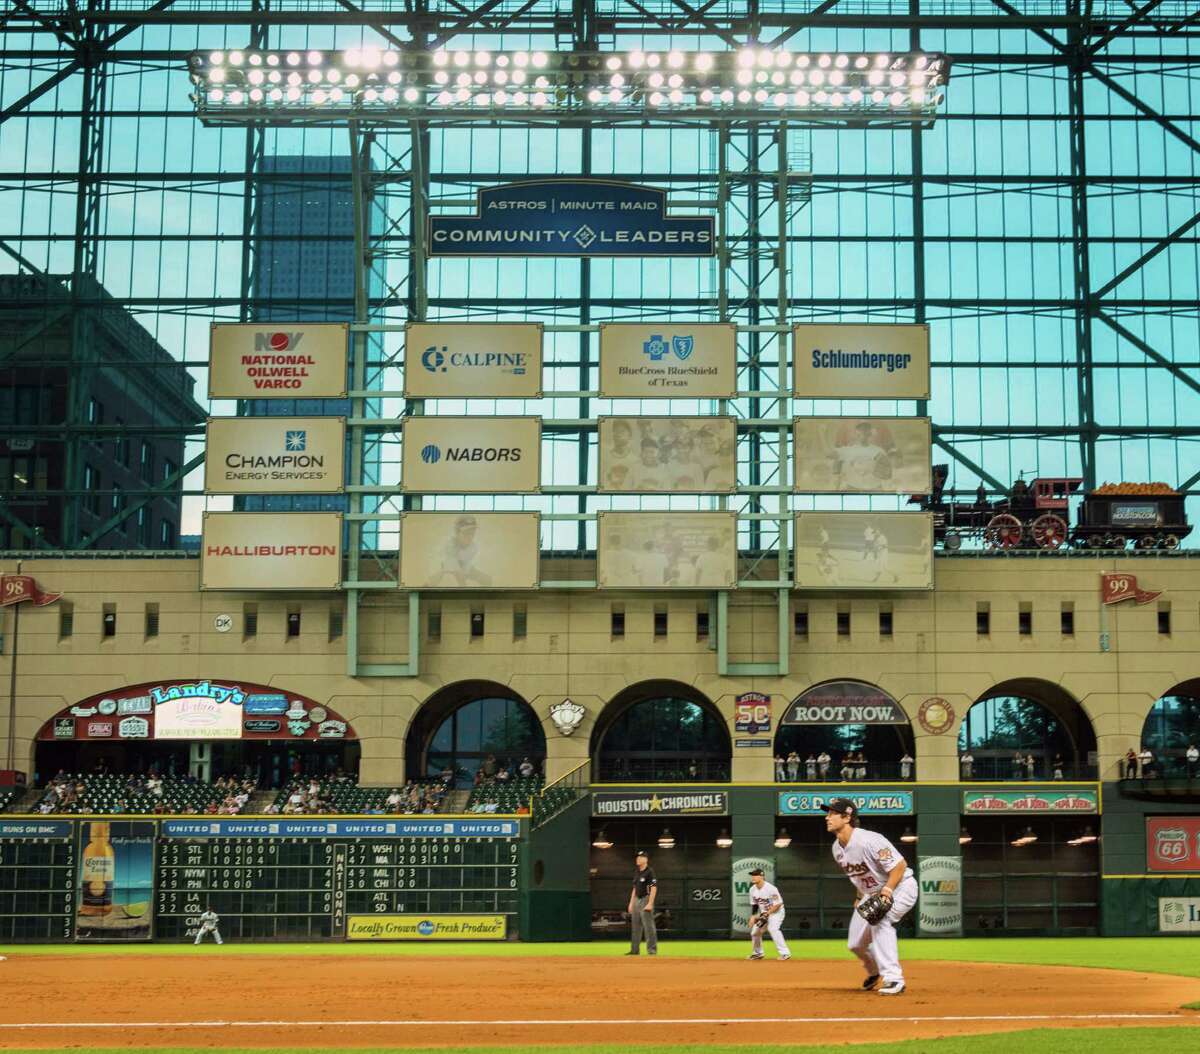 Minute Maid signage due an outfield shift